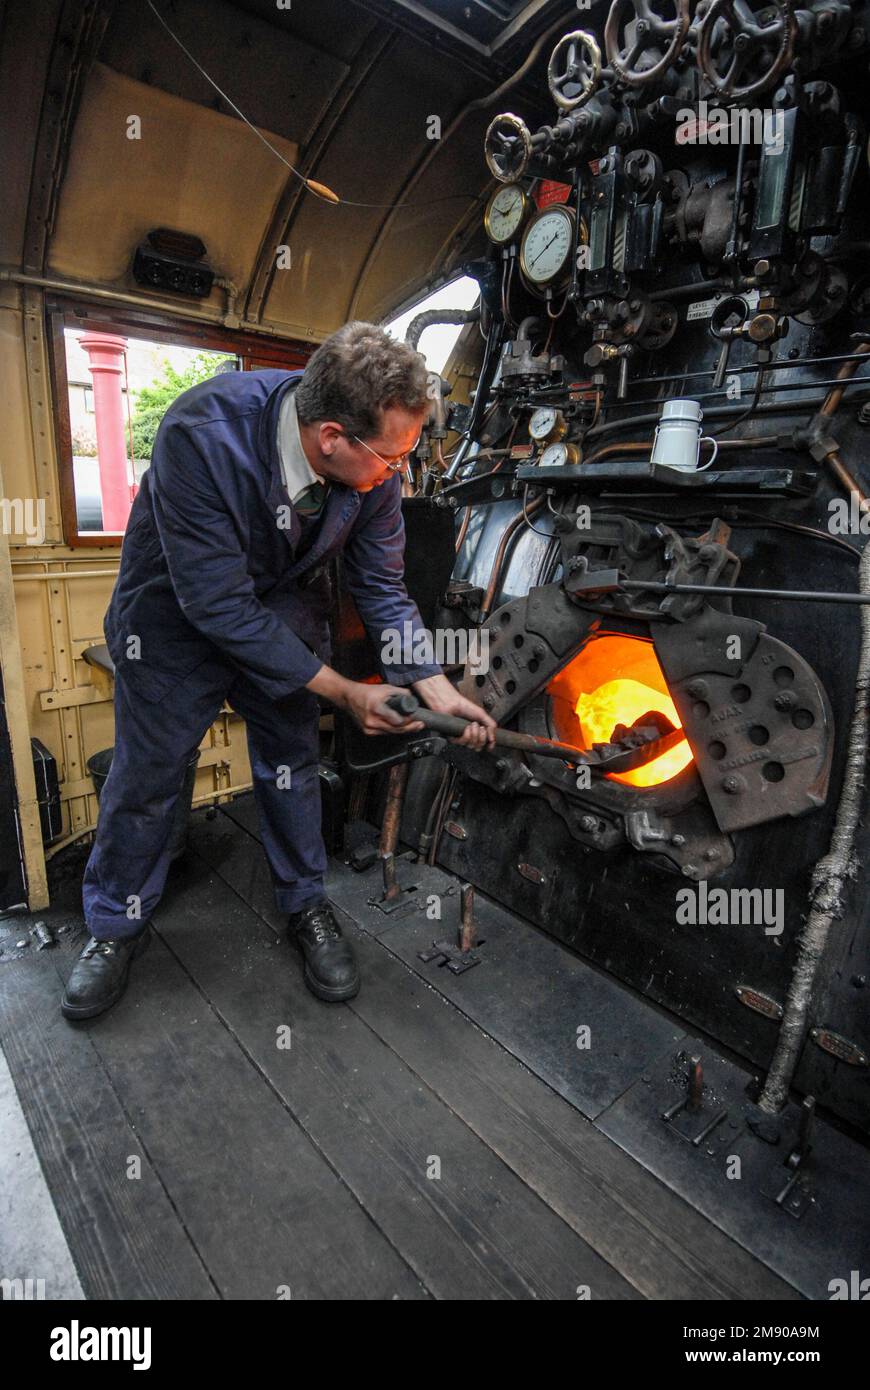 A steam engine fireman using a shovel, stoking coal into the steam train furnace at Winchcombe station in the Cotswolds in Britain.  It is part of the Stock Photo